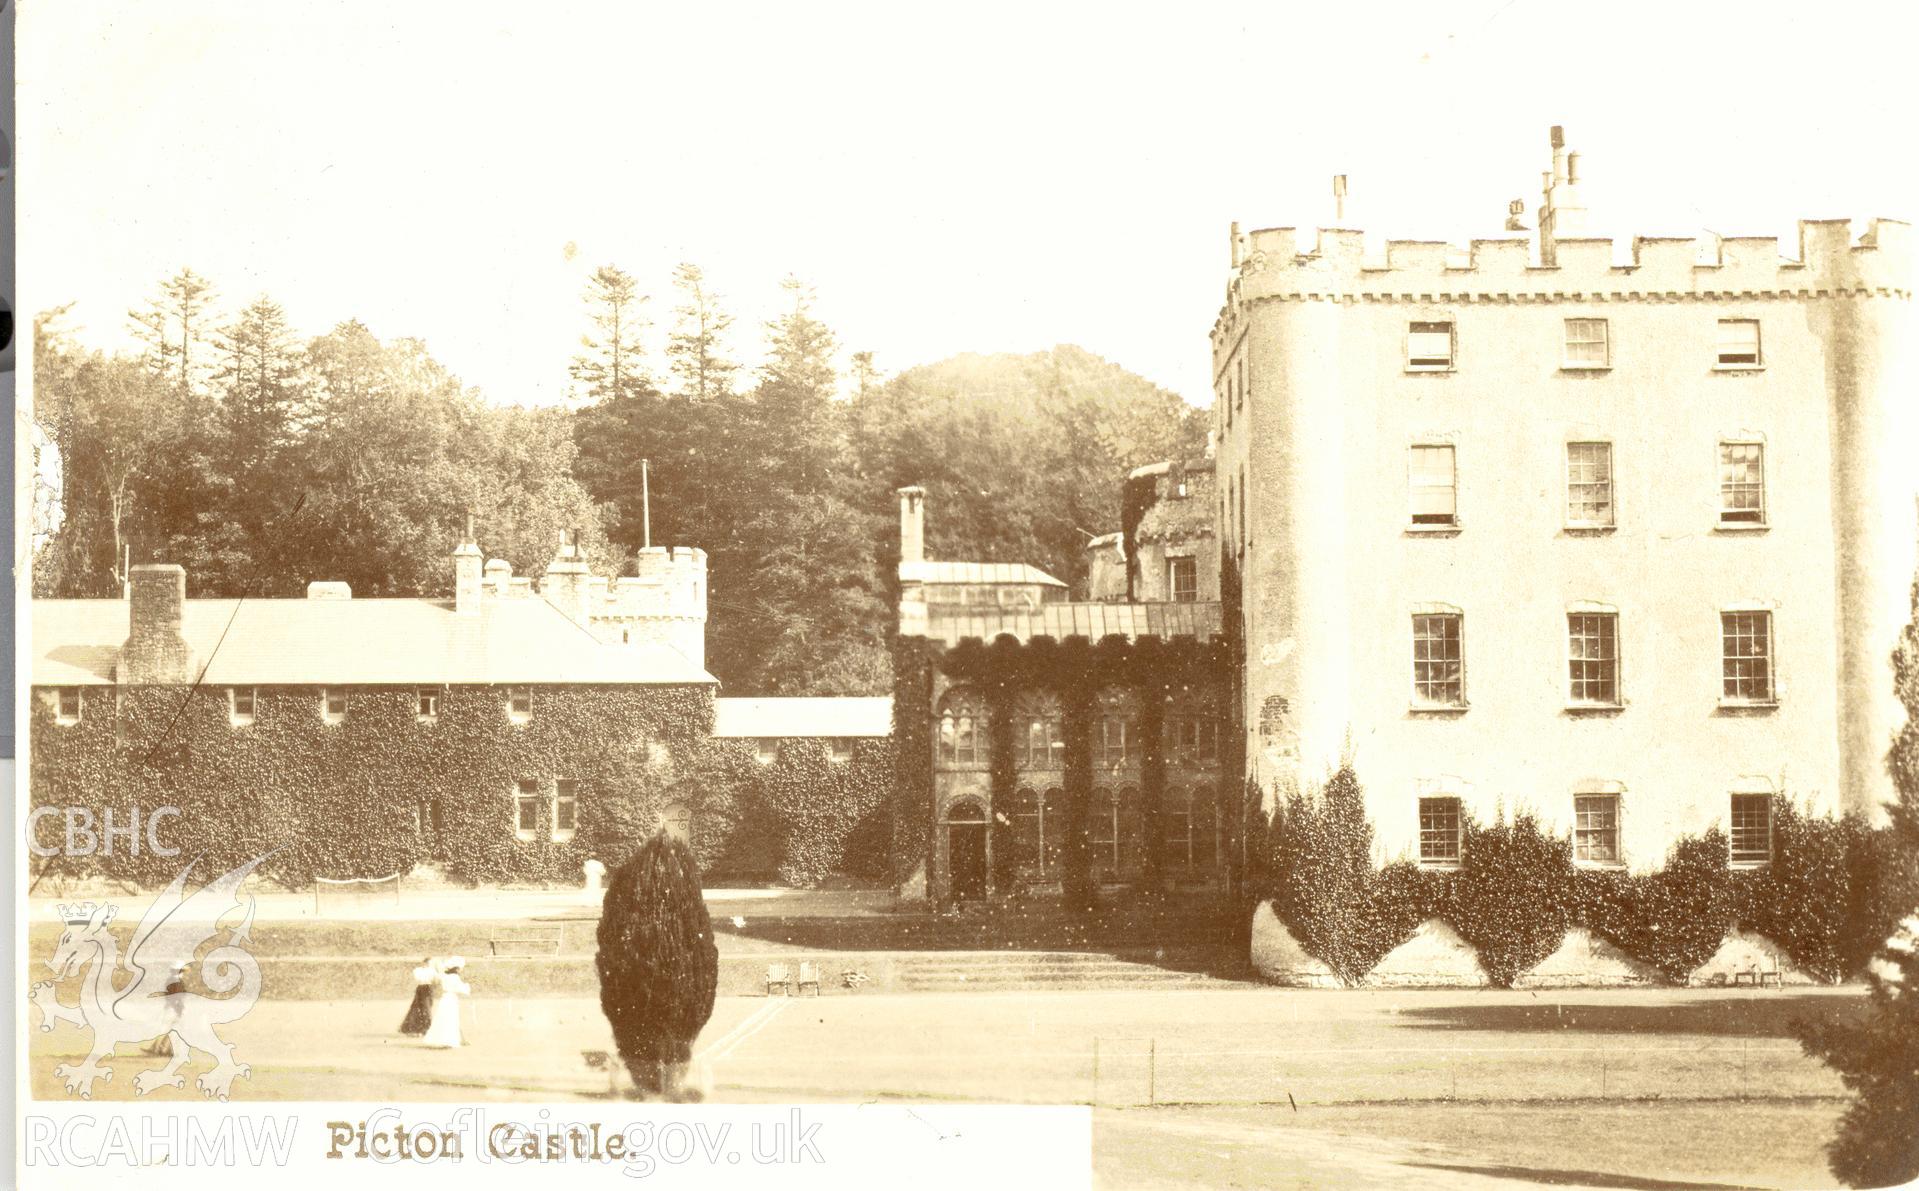 Digitised postcard image of Picton Castle, Slebech, The Excelsior Photo Co. Ltd., Carmarthen. Produced by Parks and Gardens Data Services, from an original item in the Peter Davis Collection at Parks and Gardens UK. We hold only web-resolution images of this collection, suitable for viewing on screen and for research purposes only. We do not hold the original images, or publication quality scans.